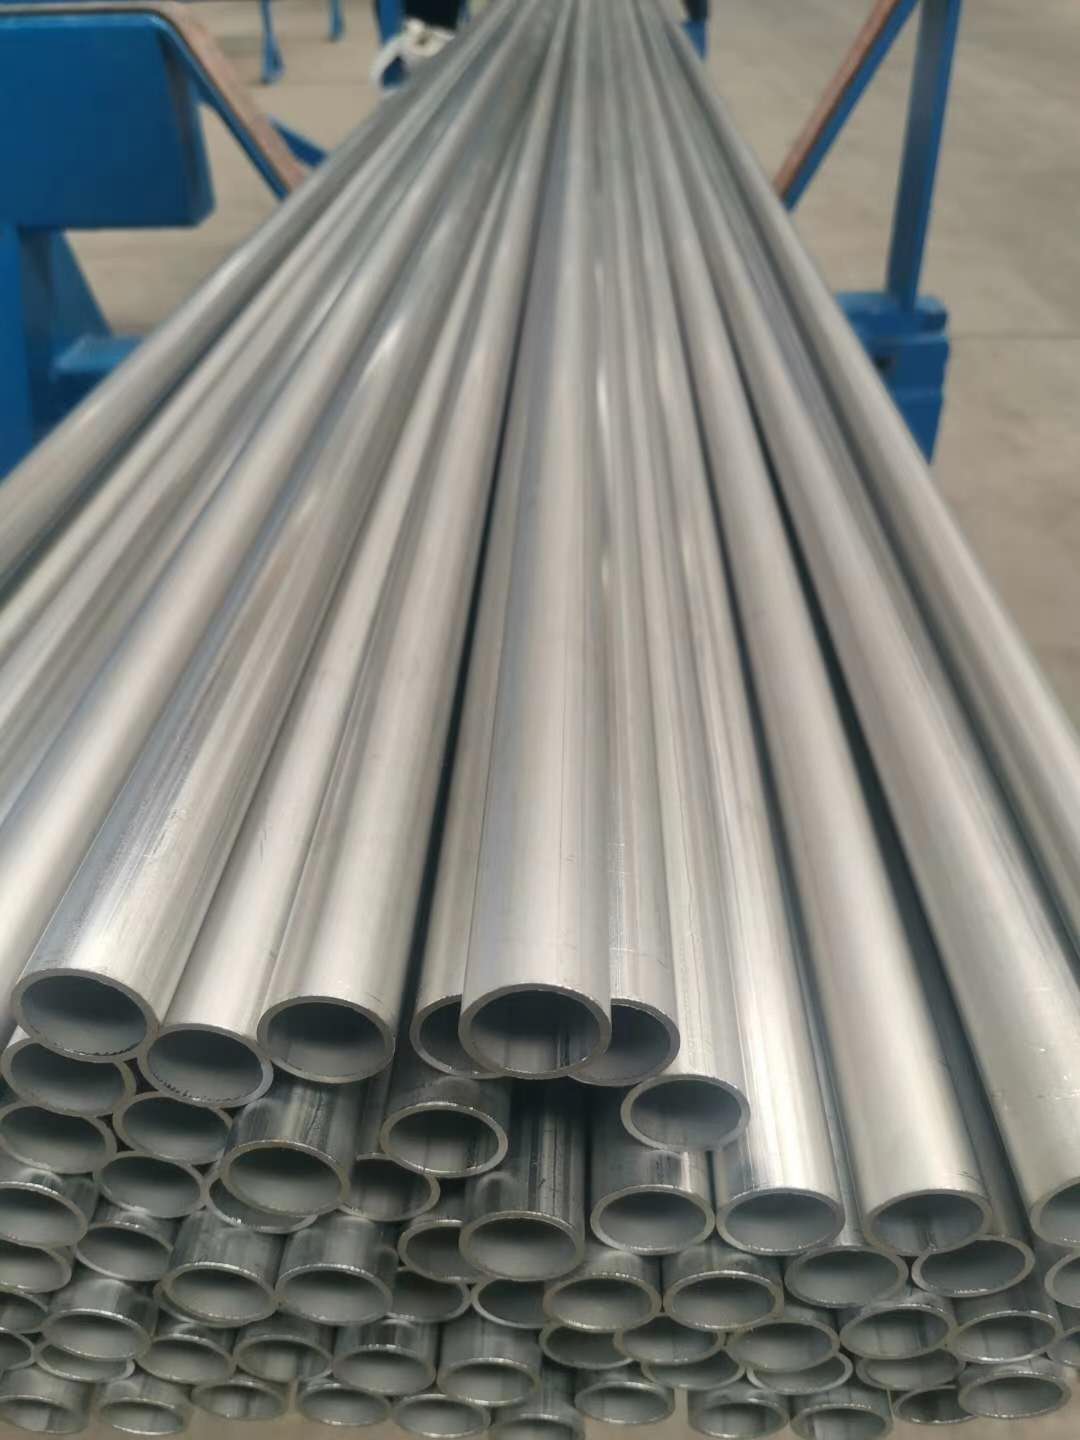 Stainless Steel Pipe - California - Chico ID1557366 2